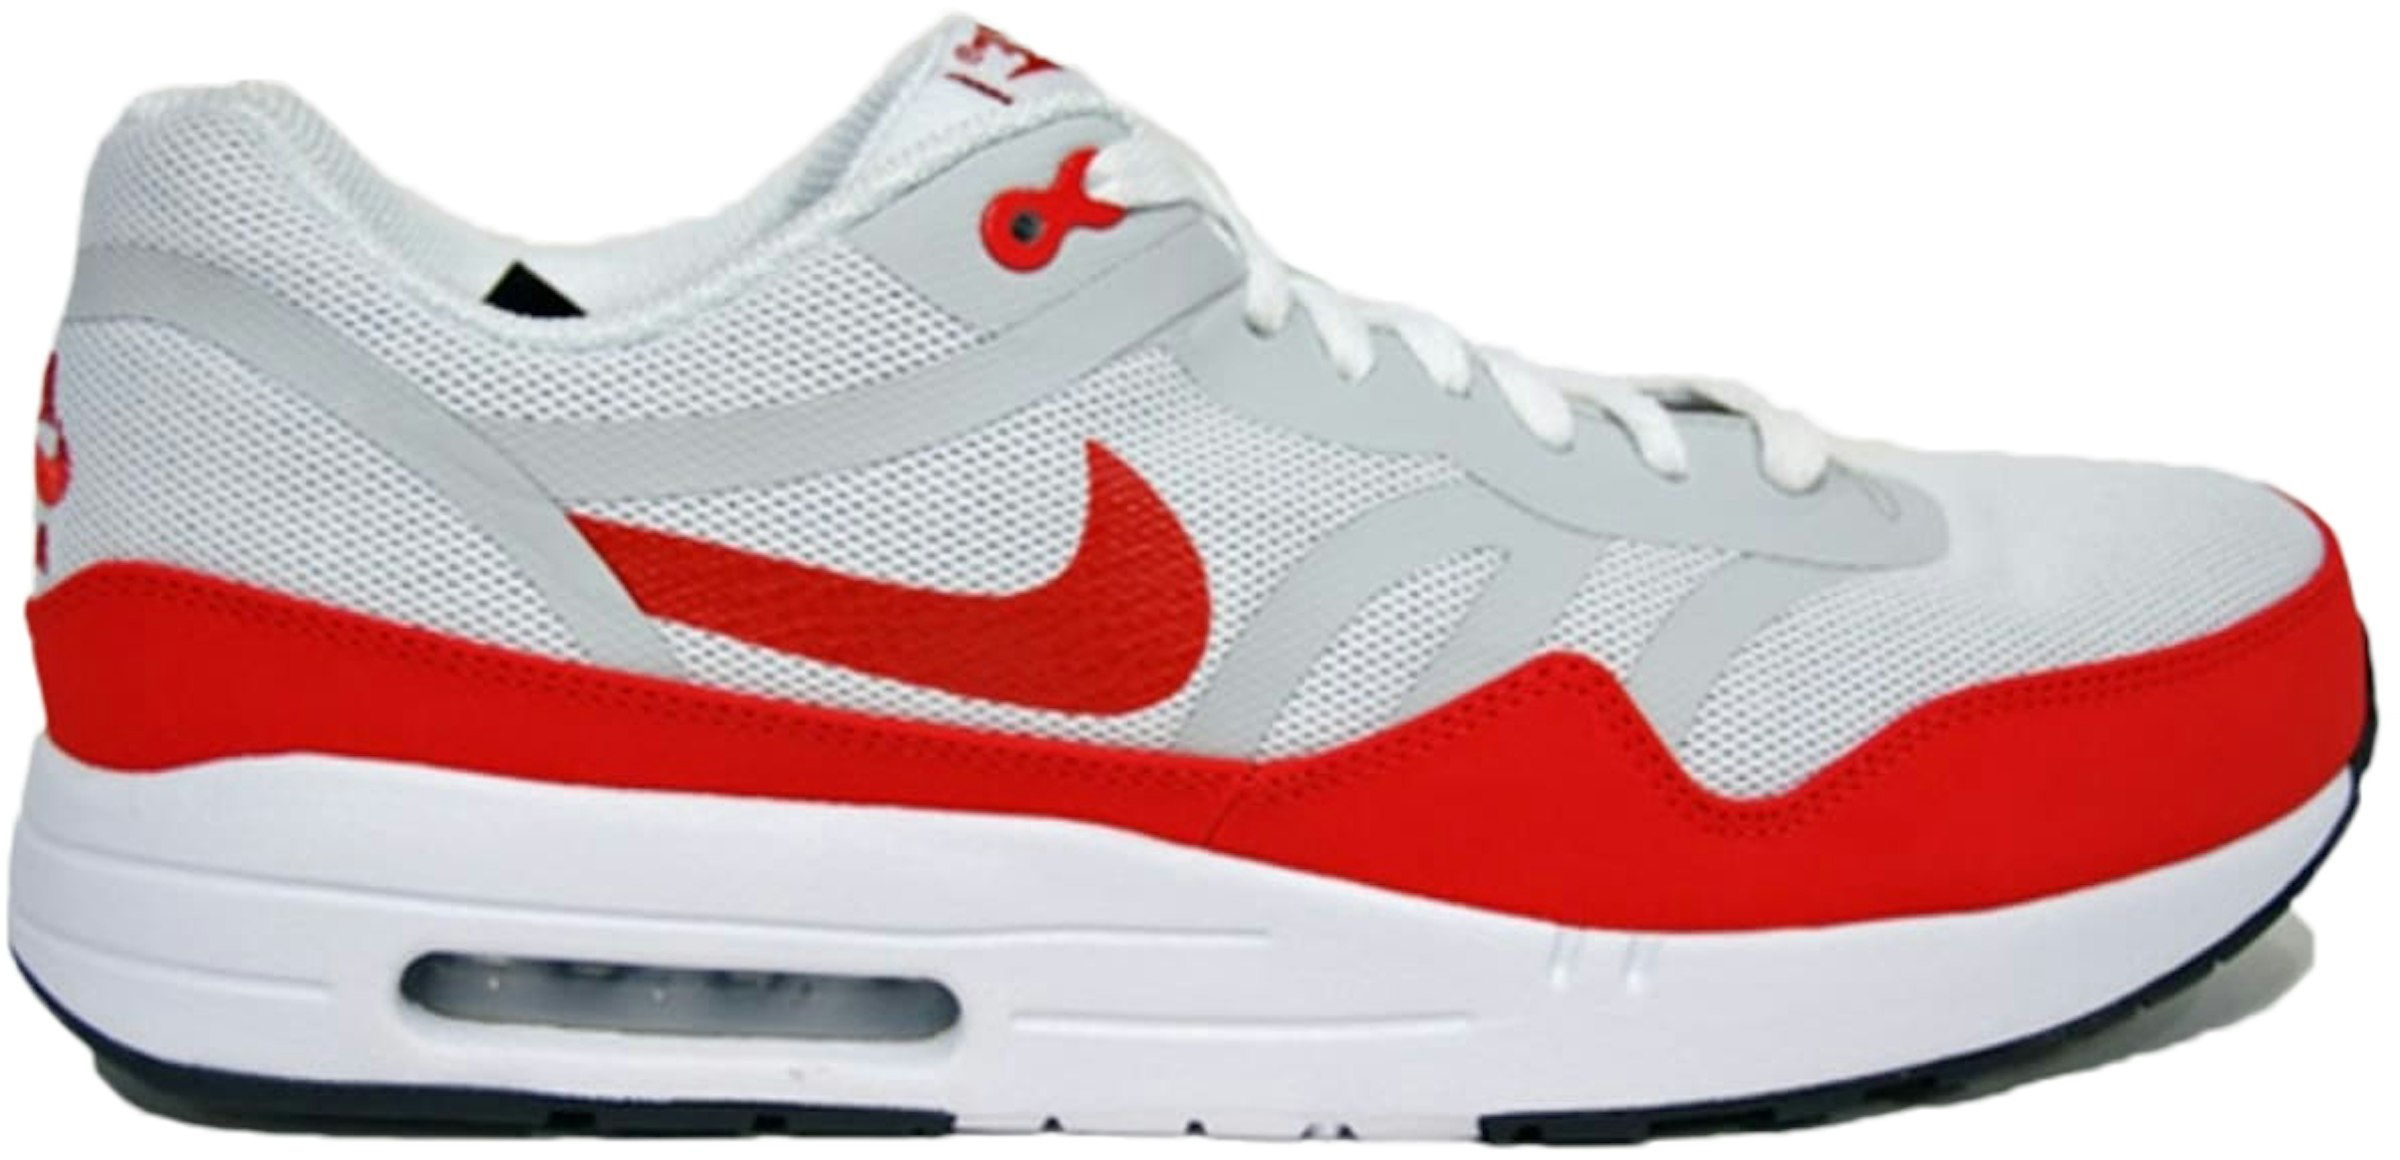 Nike Air Max Tape Challenge Red Men's - 624232-160 - US